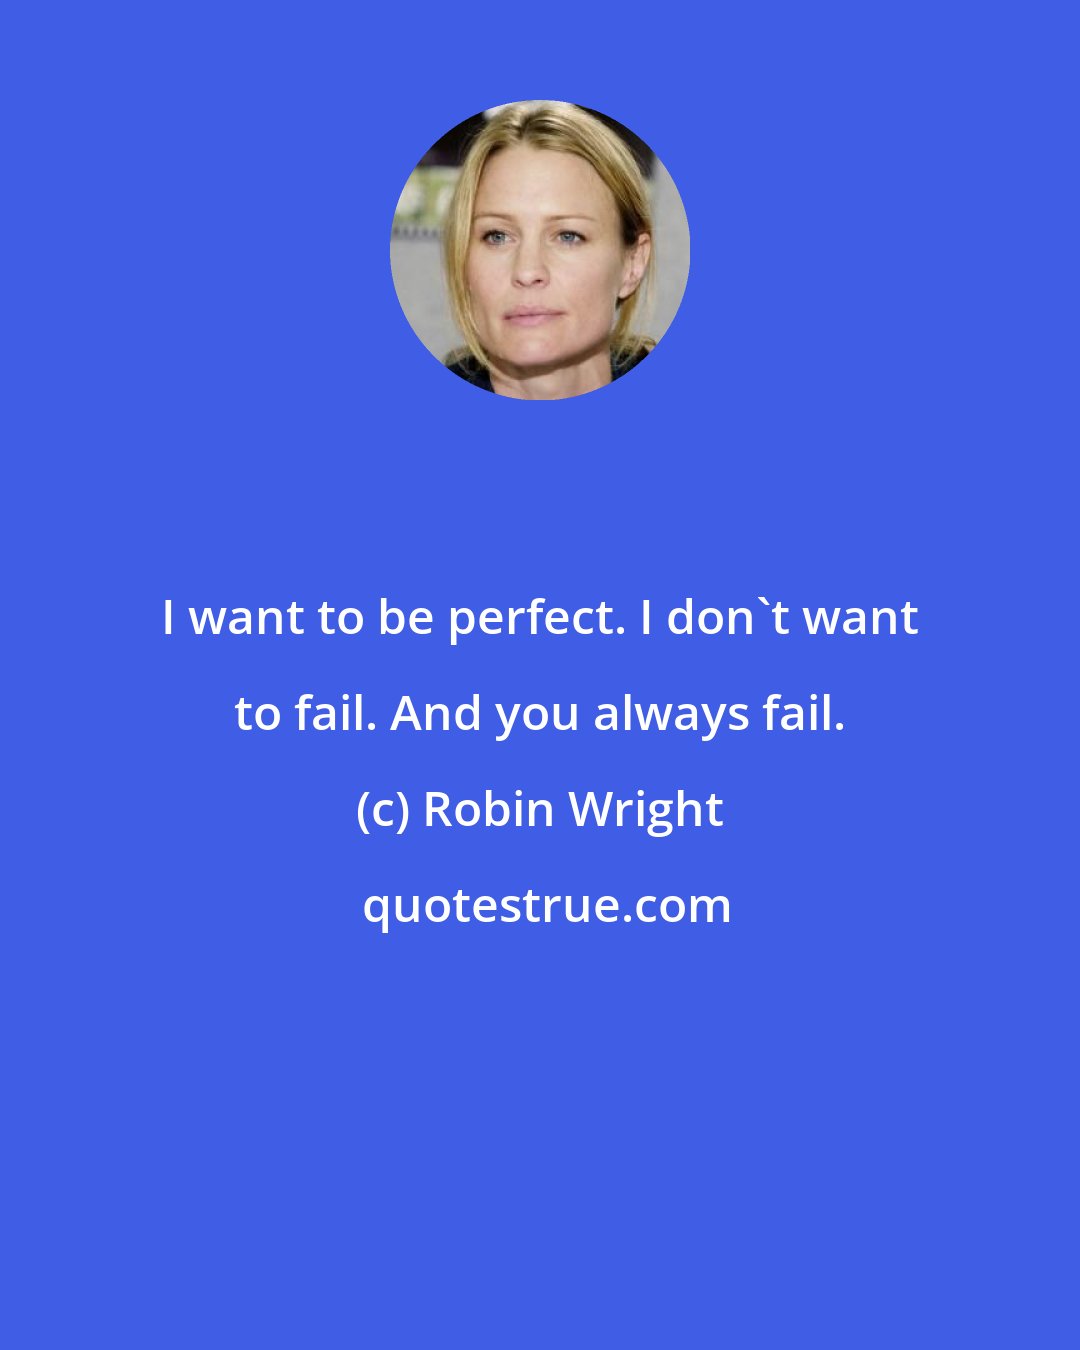 Robin Wright: I want to be perfect. I don't want to fail. And you always fail.